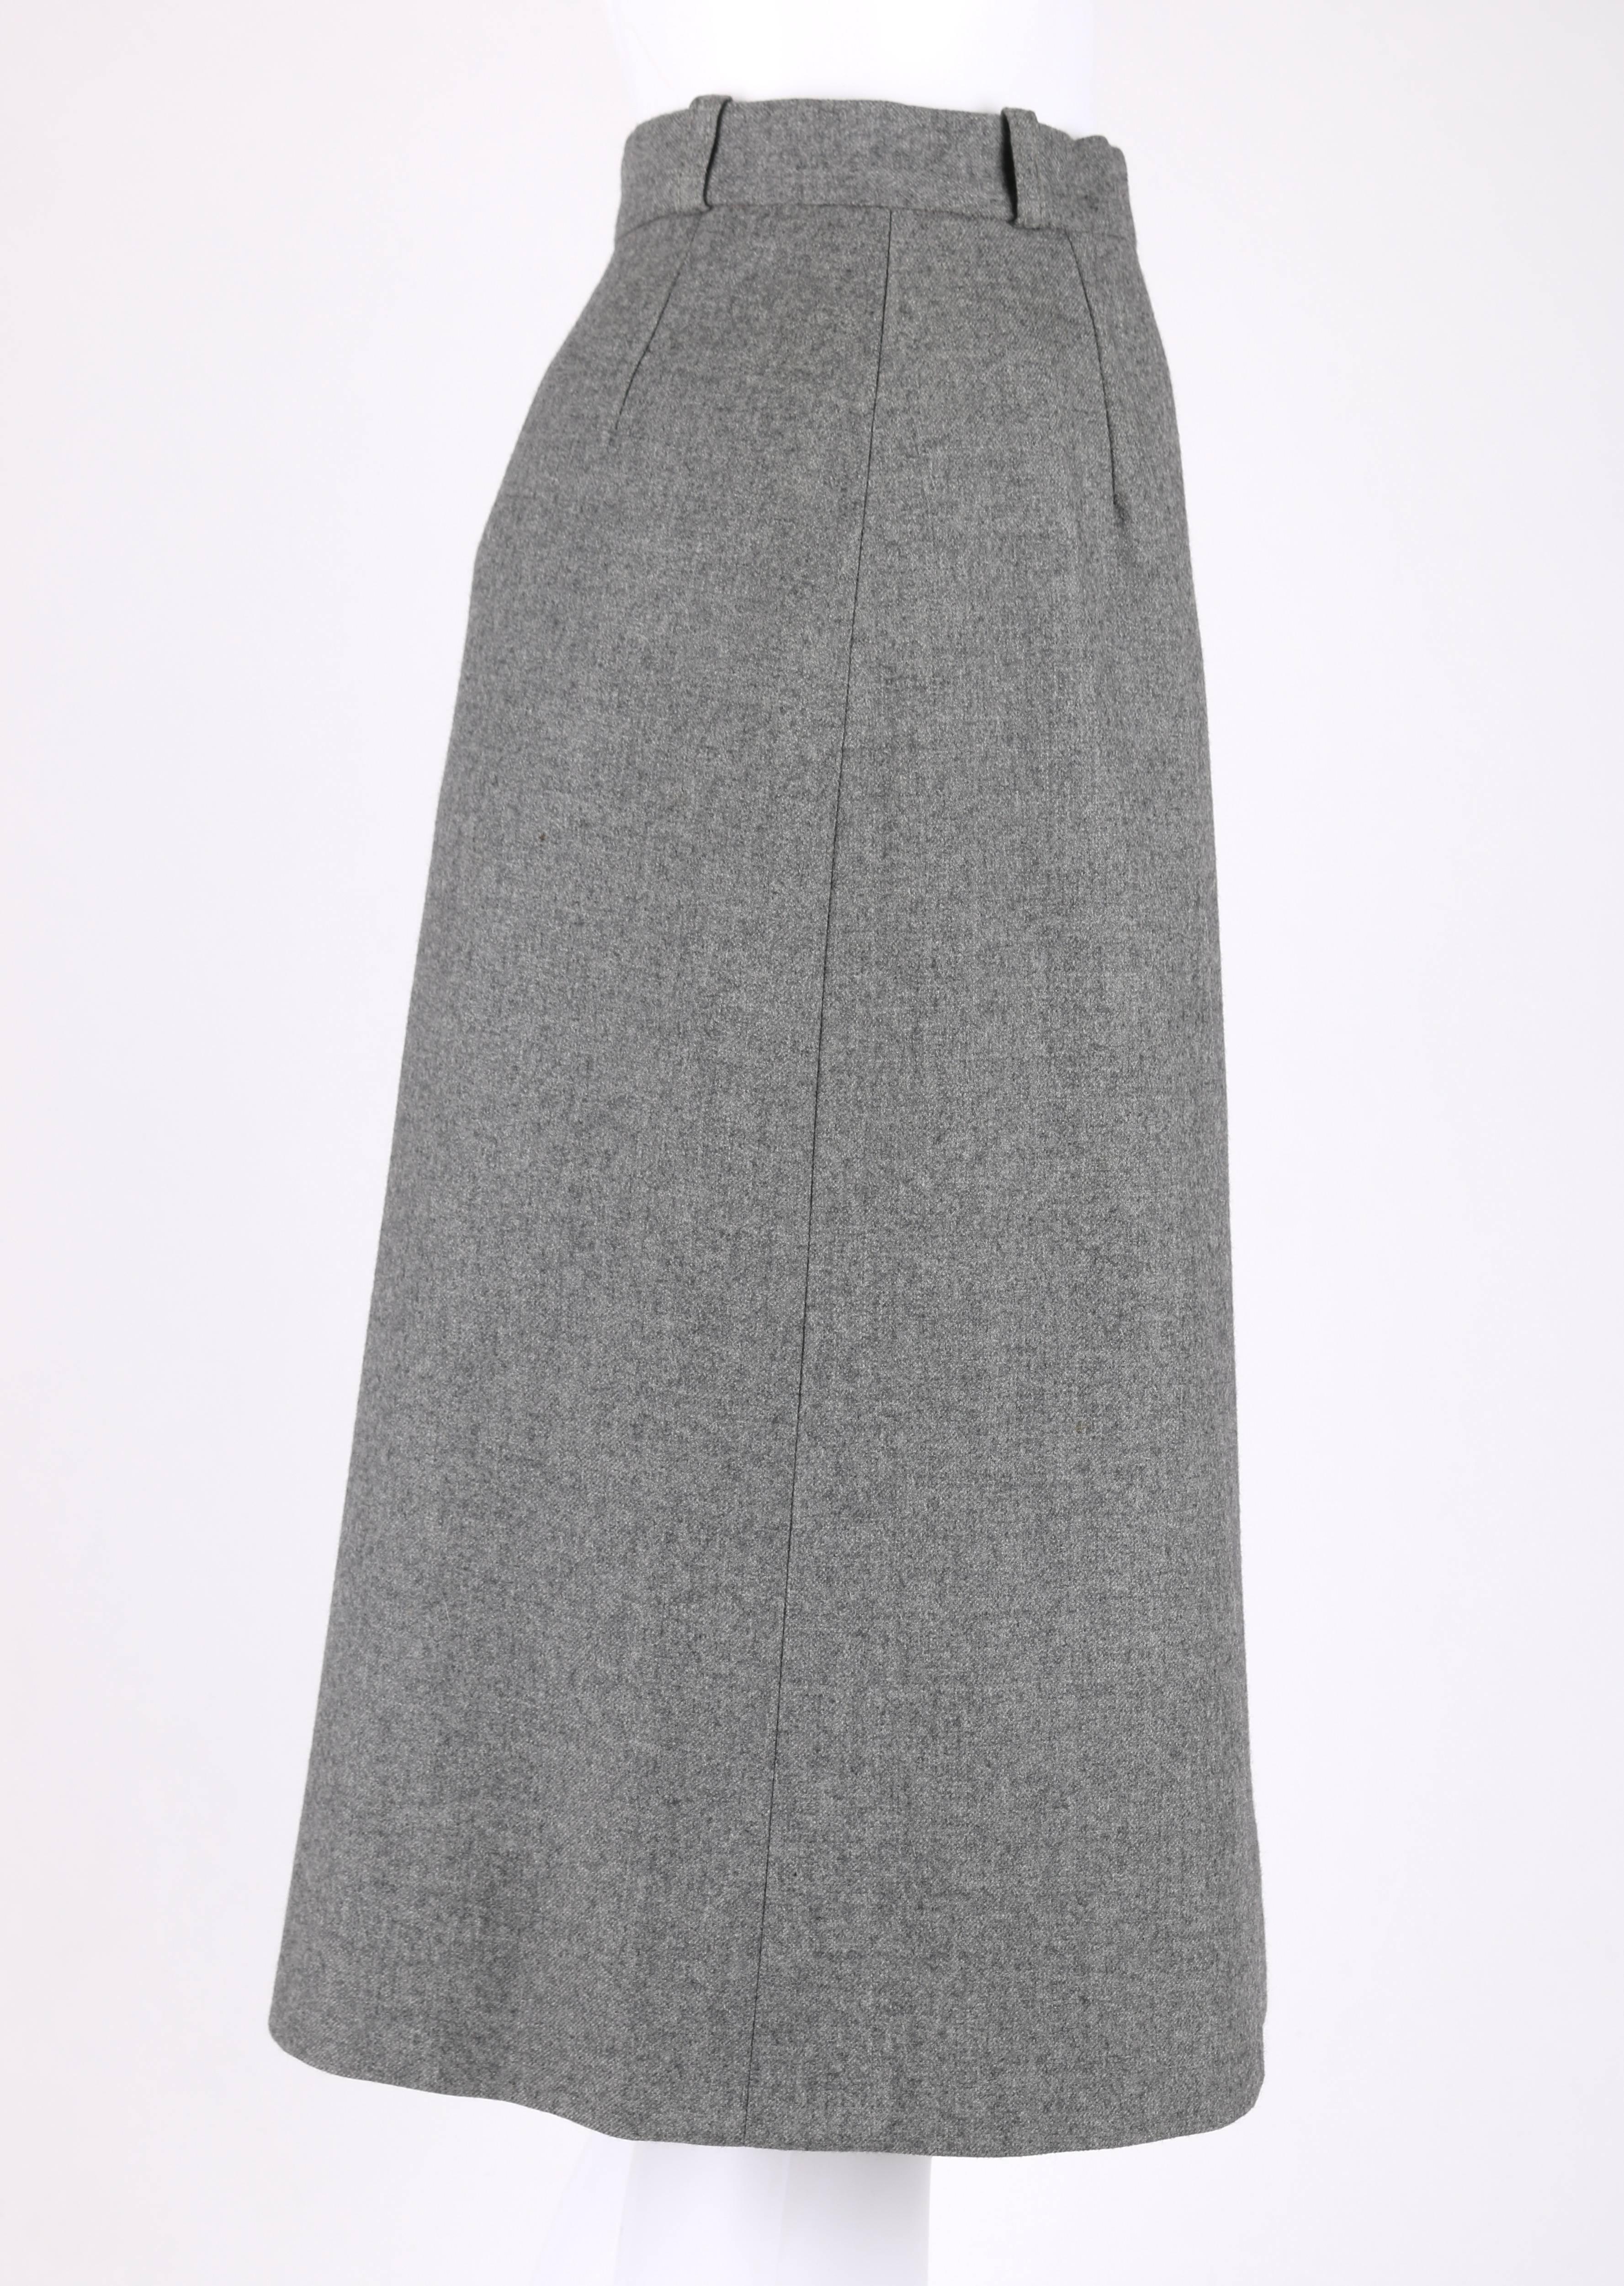 GUCCI c.1970's Gray Wool Classic Wrap Skirt Brown Leather Piping Trim In Good Condition For Sale In Thiensville, WI